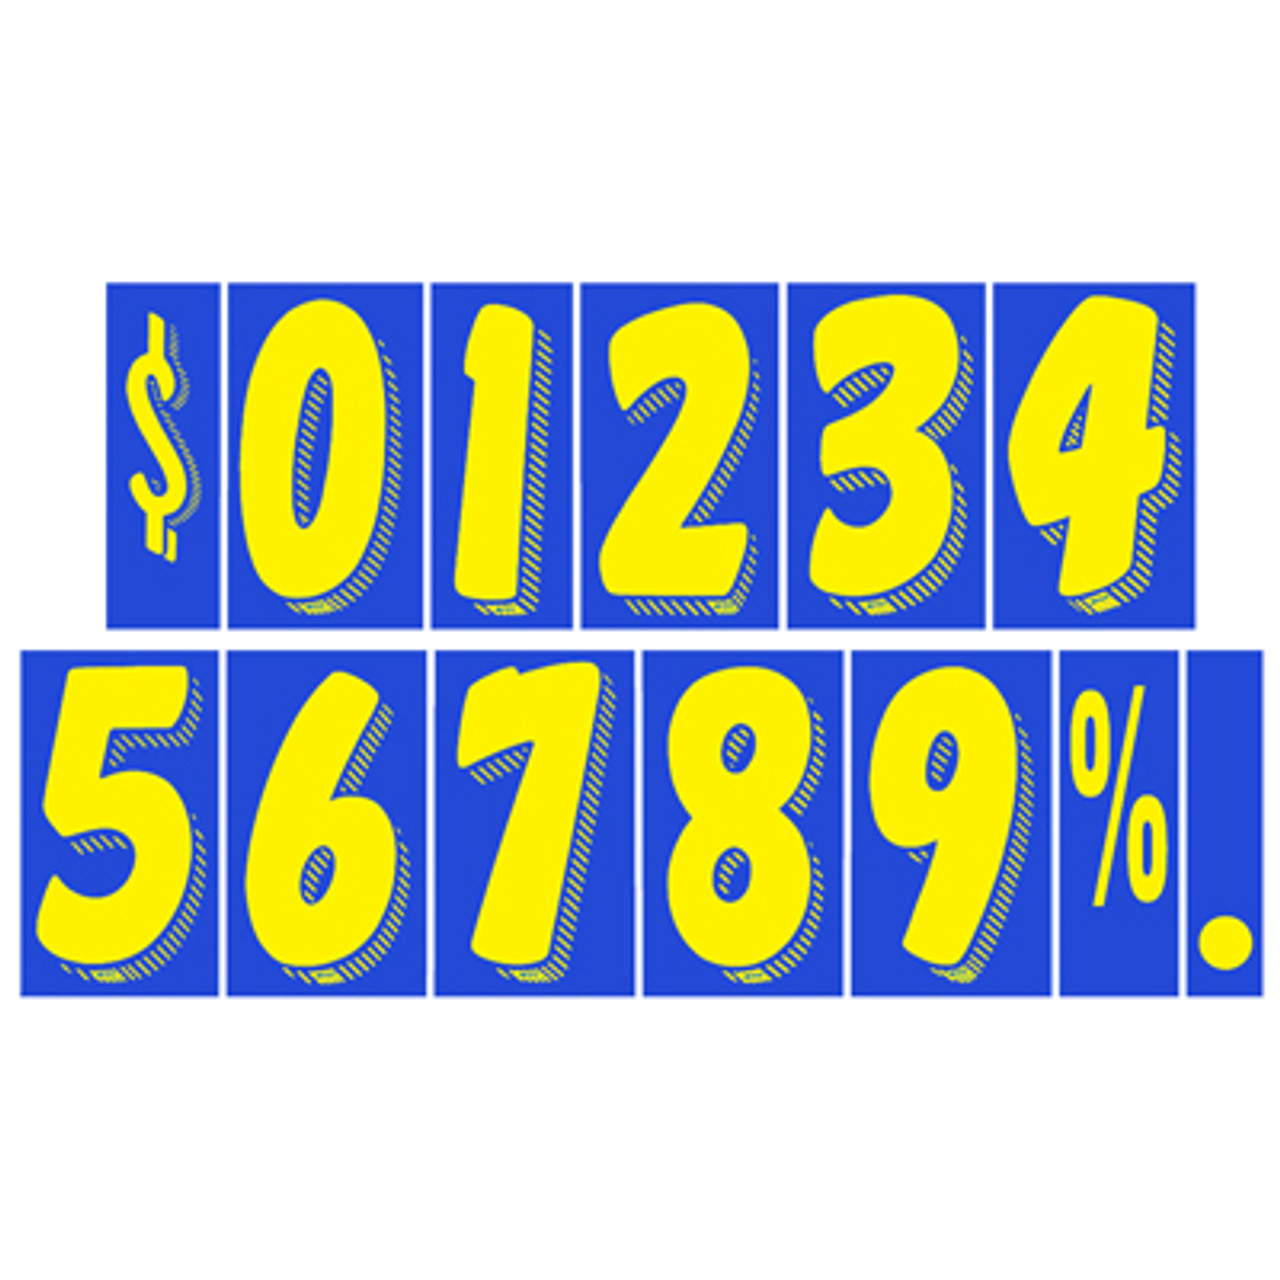 7 1/2" Yellow & Blue Adhesive Windshield Numbers